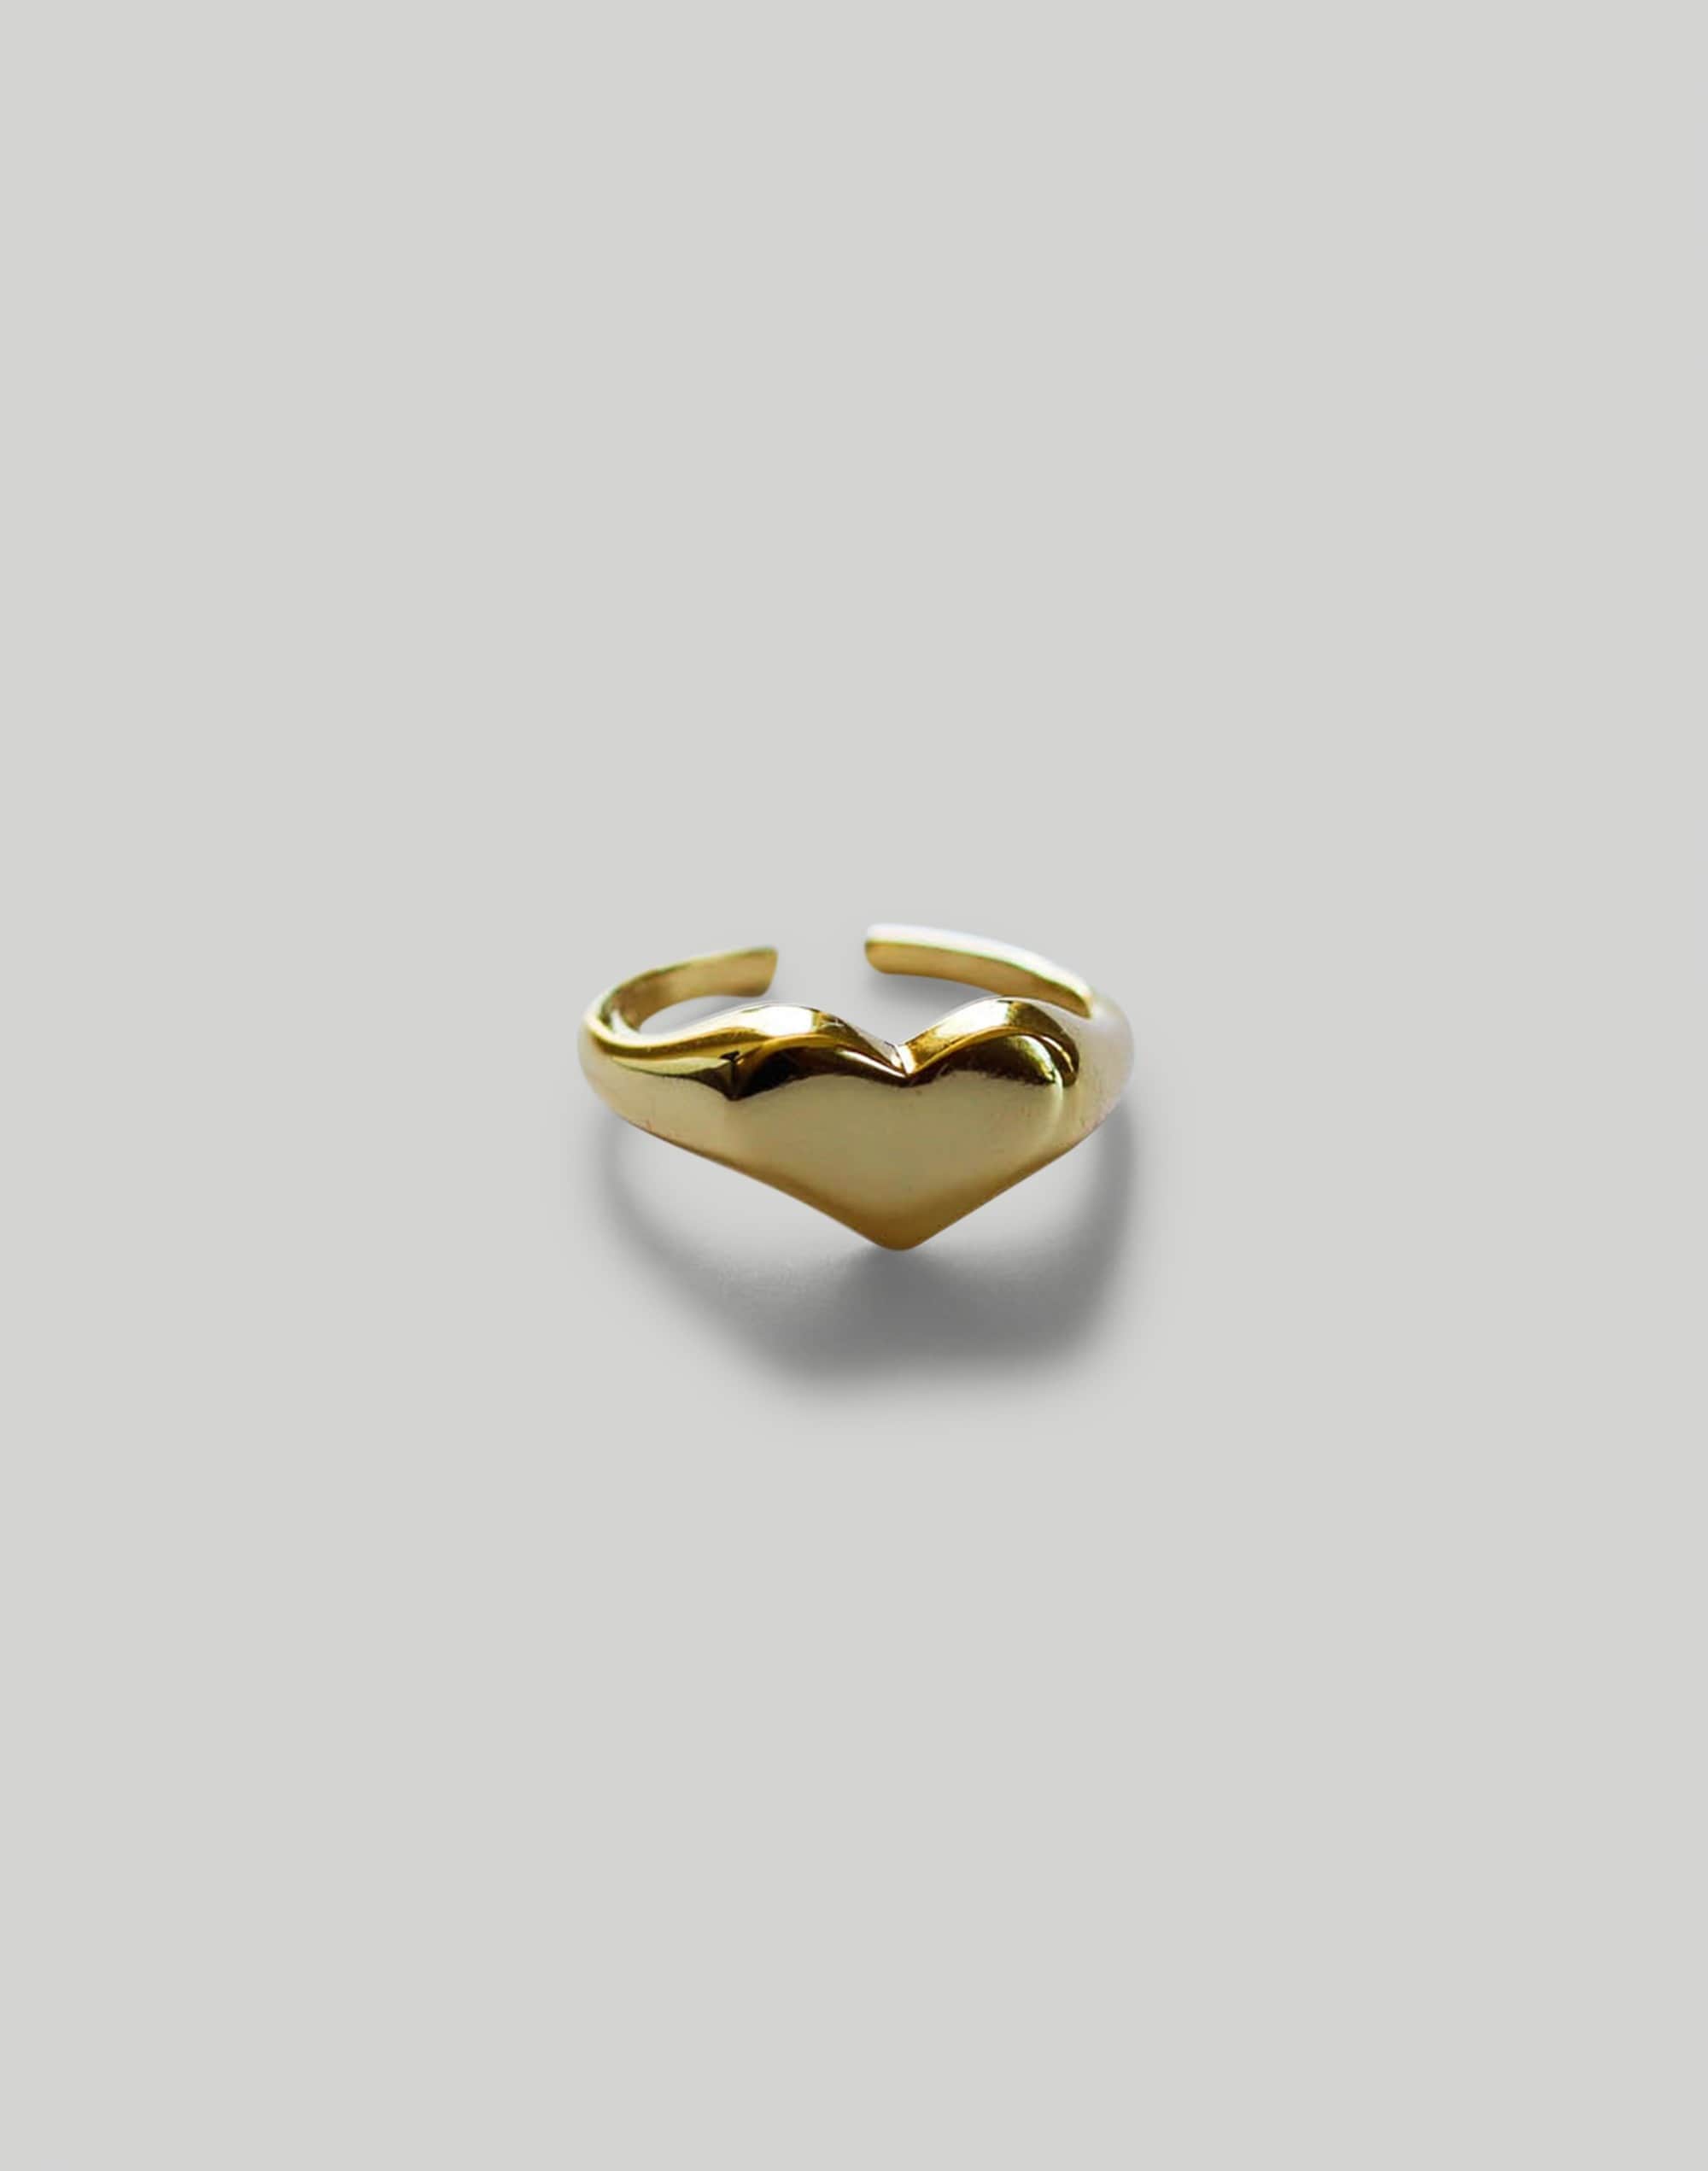 Abcrete & Co. The Chunky Heart Adjustable Ring